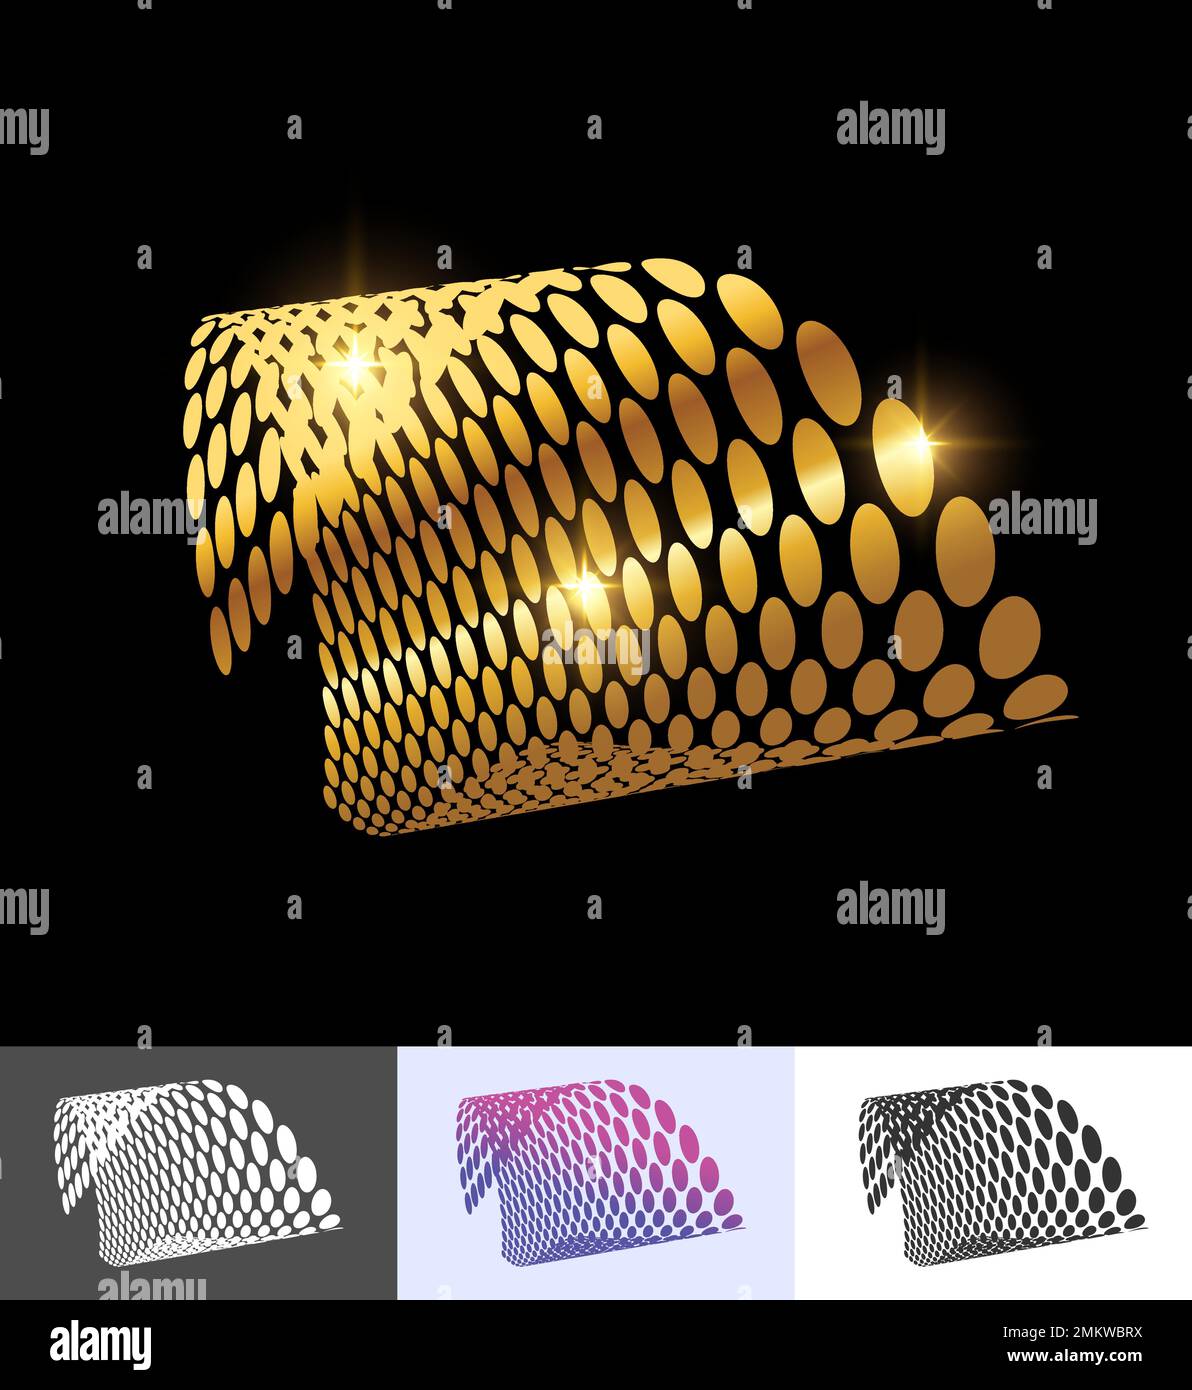 A vector illustration set of Golden Tiled Abstract perspective geometric shape design Stock Vector